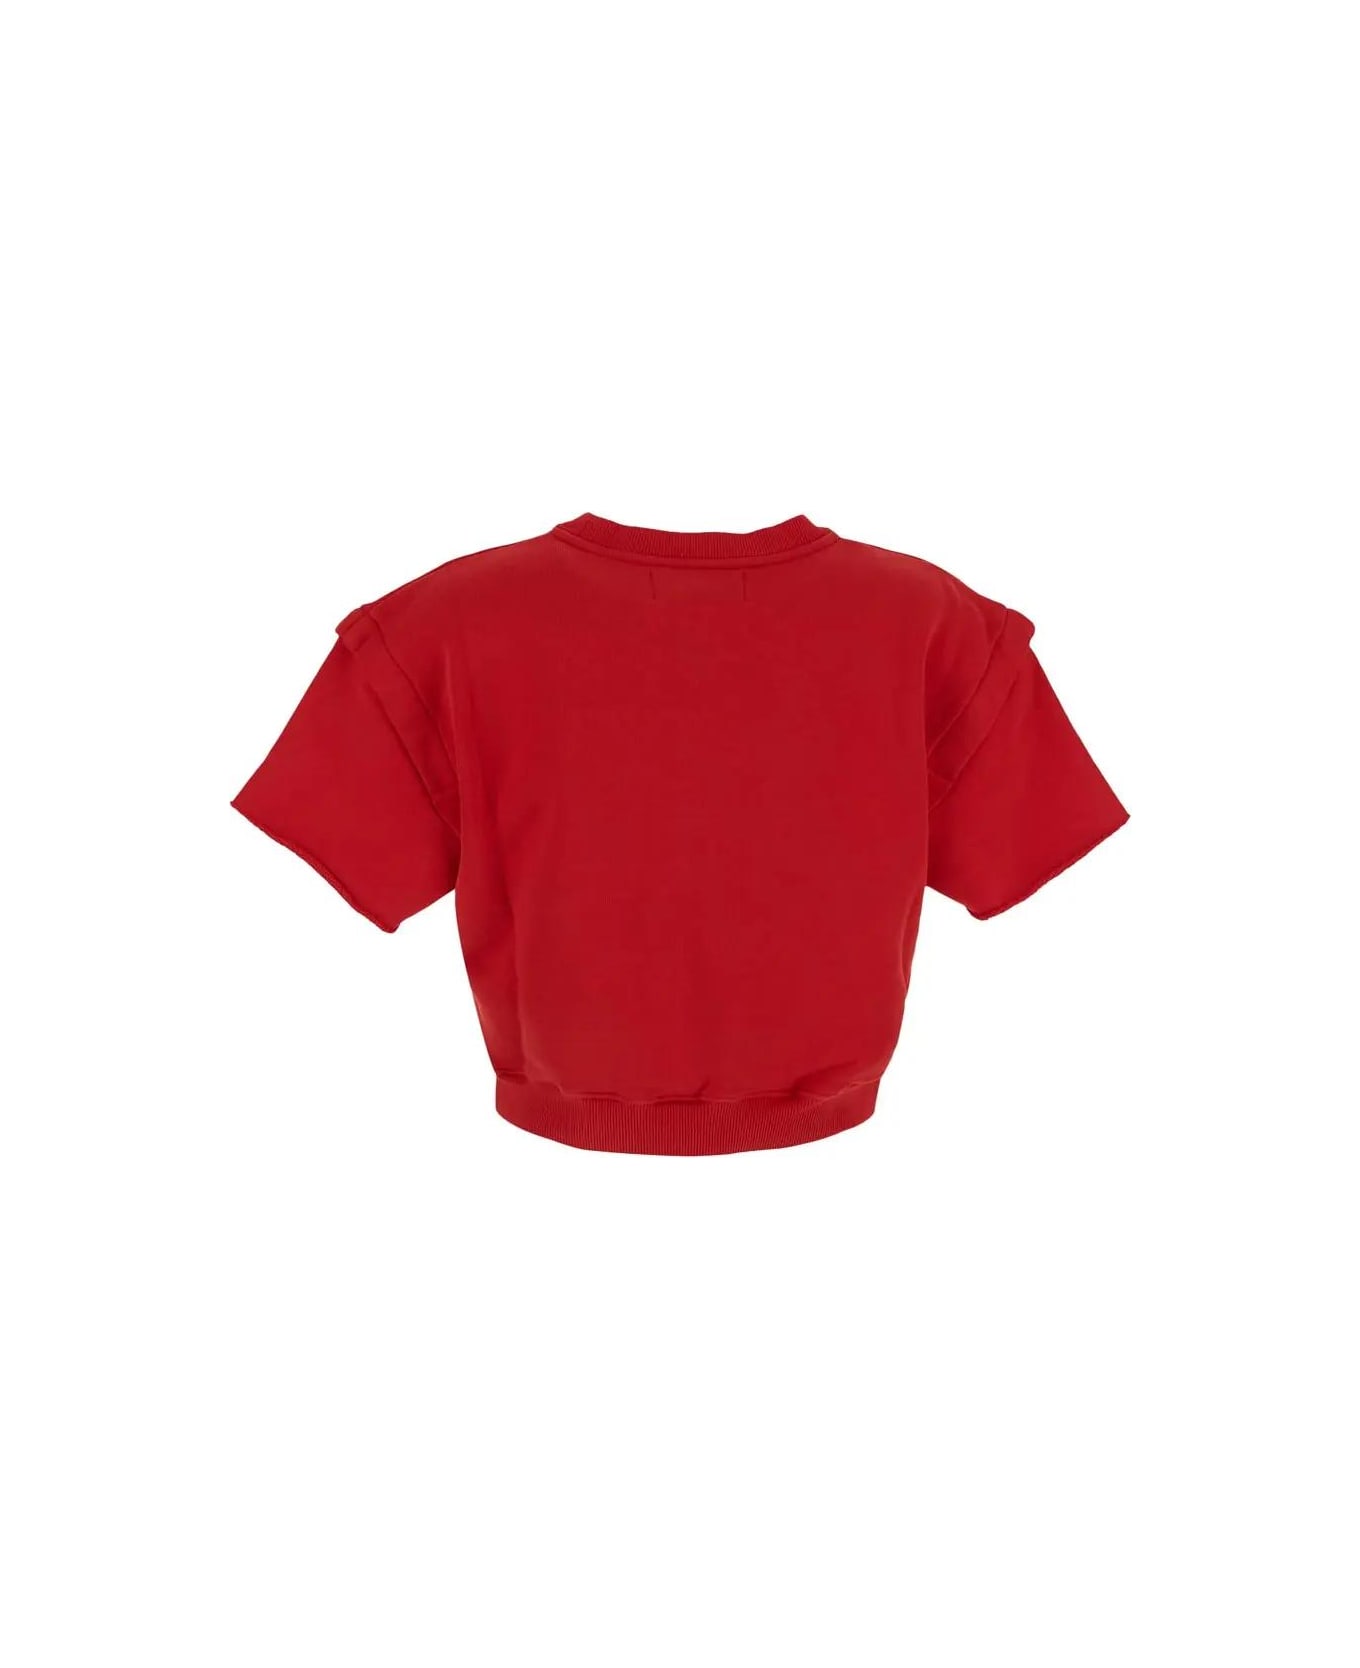 Autry T-shirt With Logo - APPAREL RED